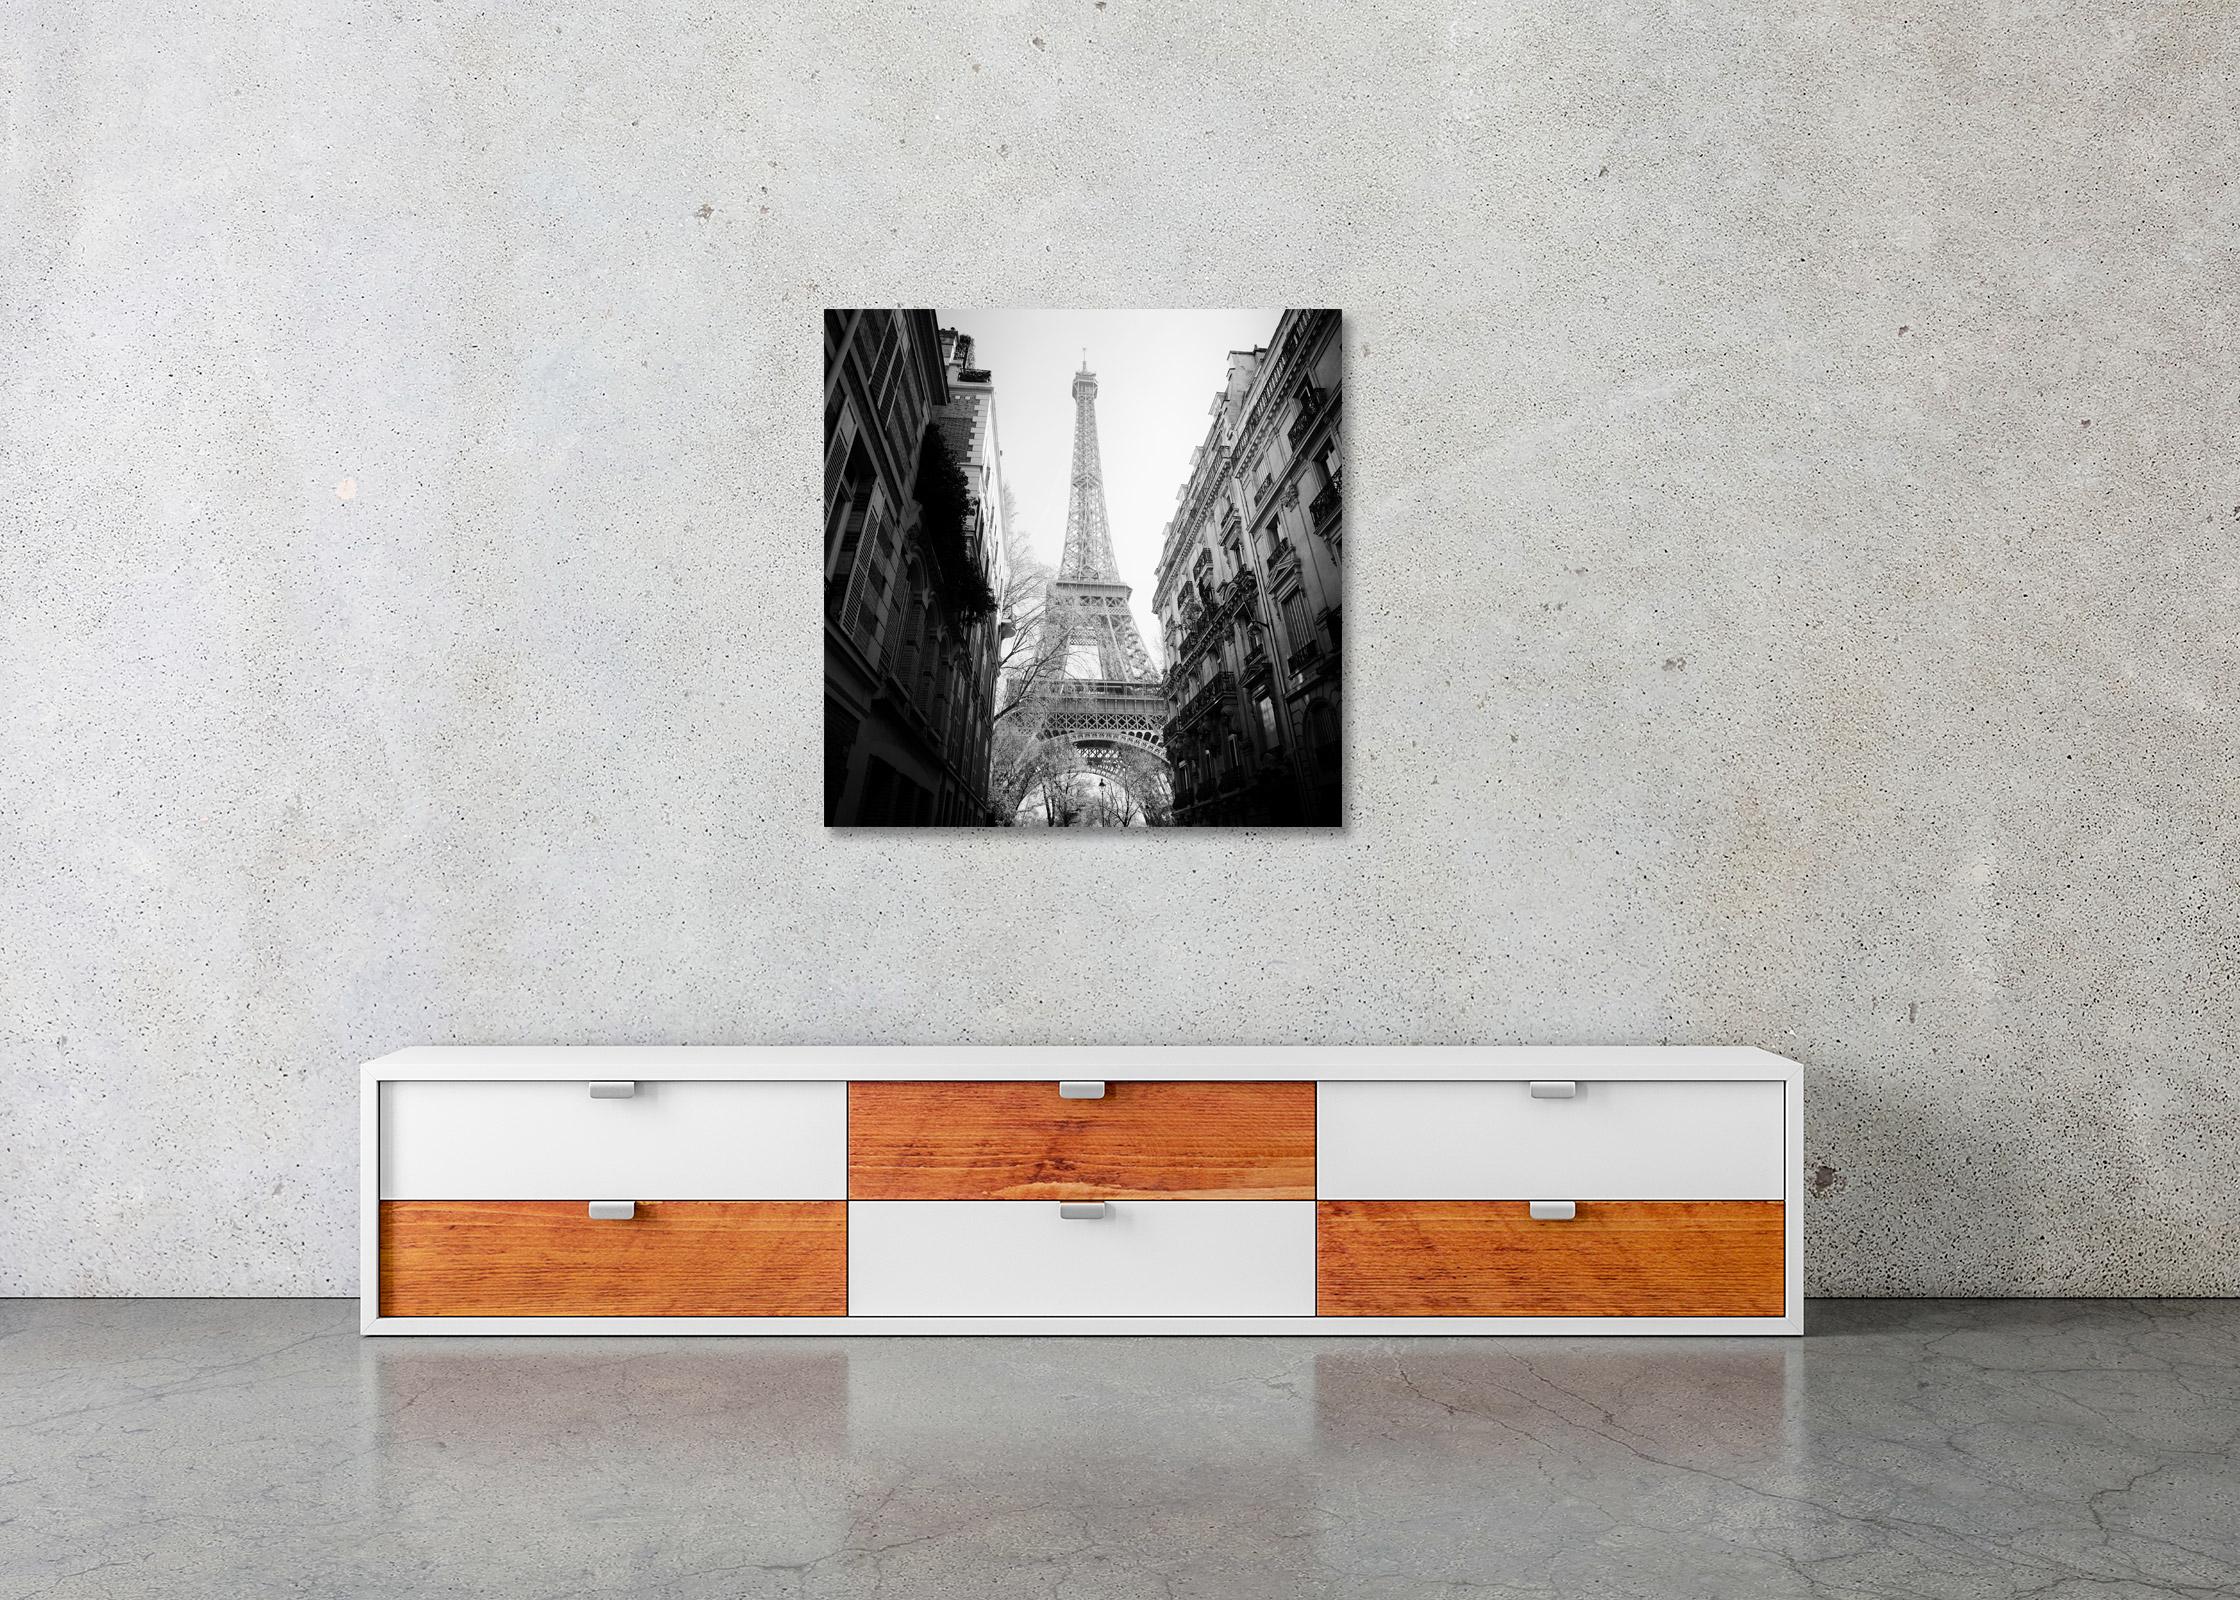 Black and White Fine Art Cityscape Photography. Archival pigment ink print, edition of 9. Signed, titled, dated and numbered by artist. Certificate of authenticity included. Printed with 4cm white border.
International award winner photographer -